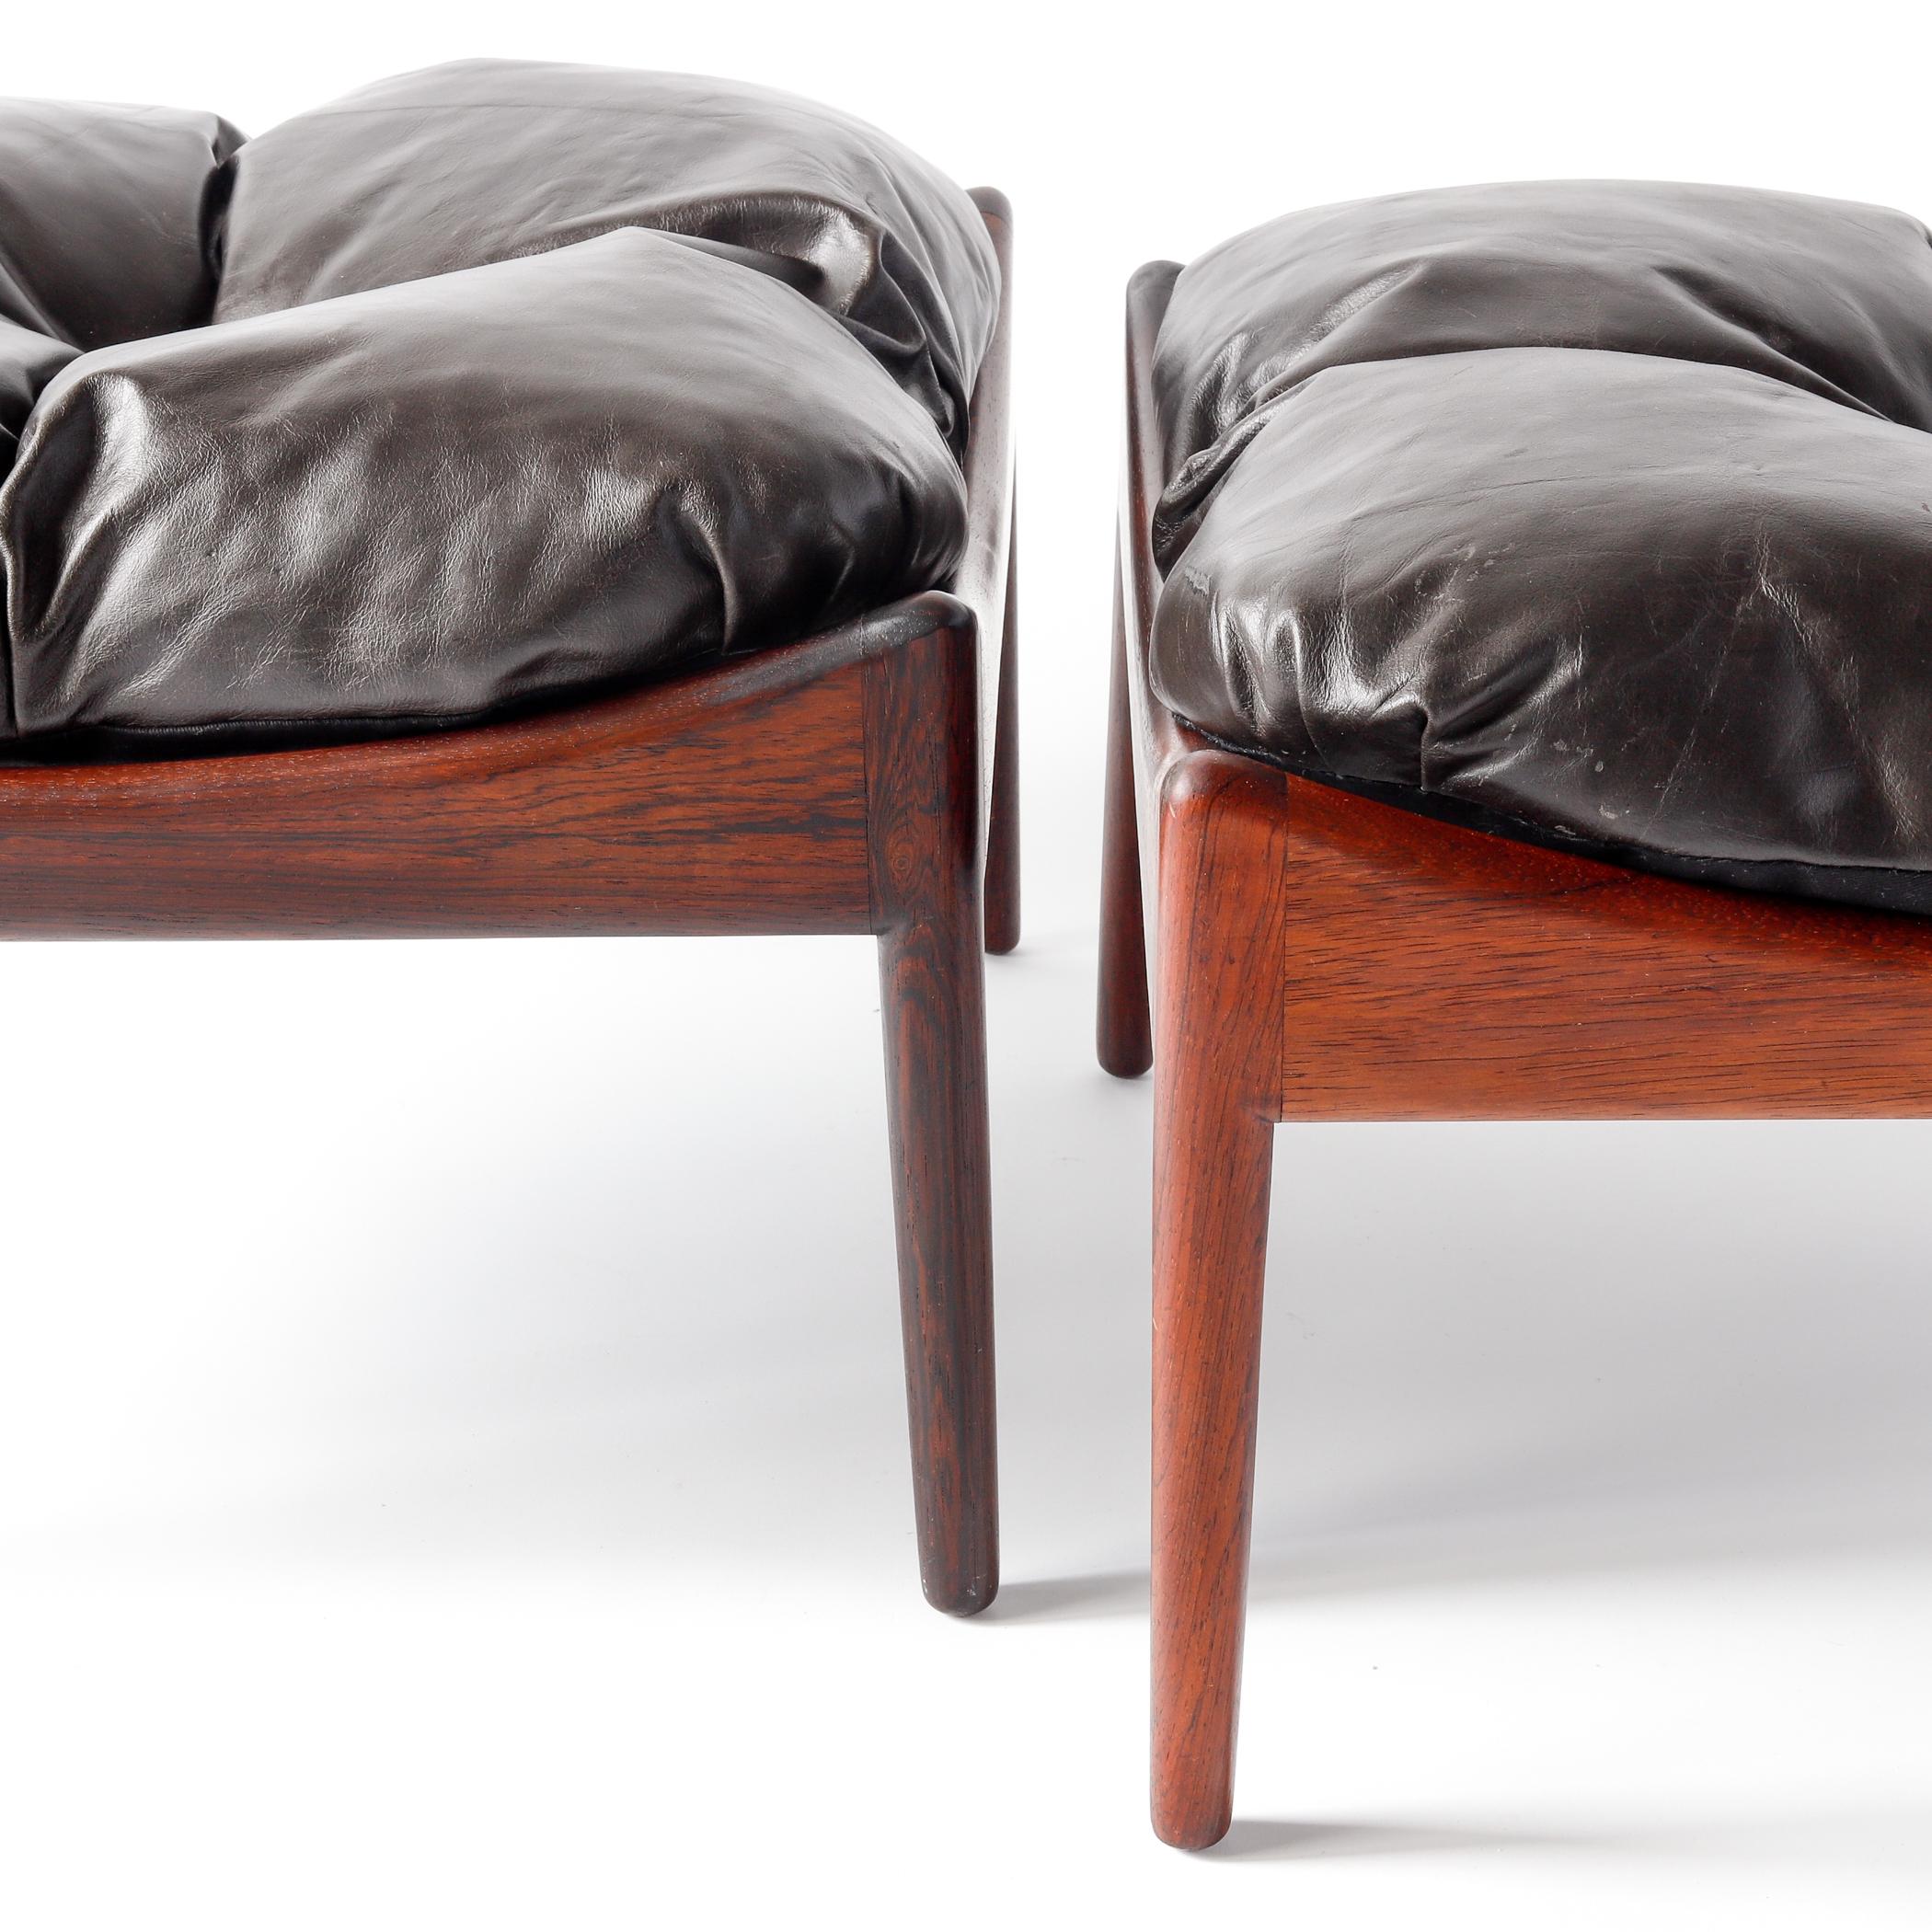 Pair of Kristian Vedel Rosewood Modus Ottomans with Brown Leather Upholstery  (Dänisch) im Angebot